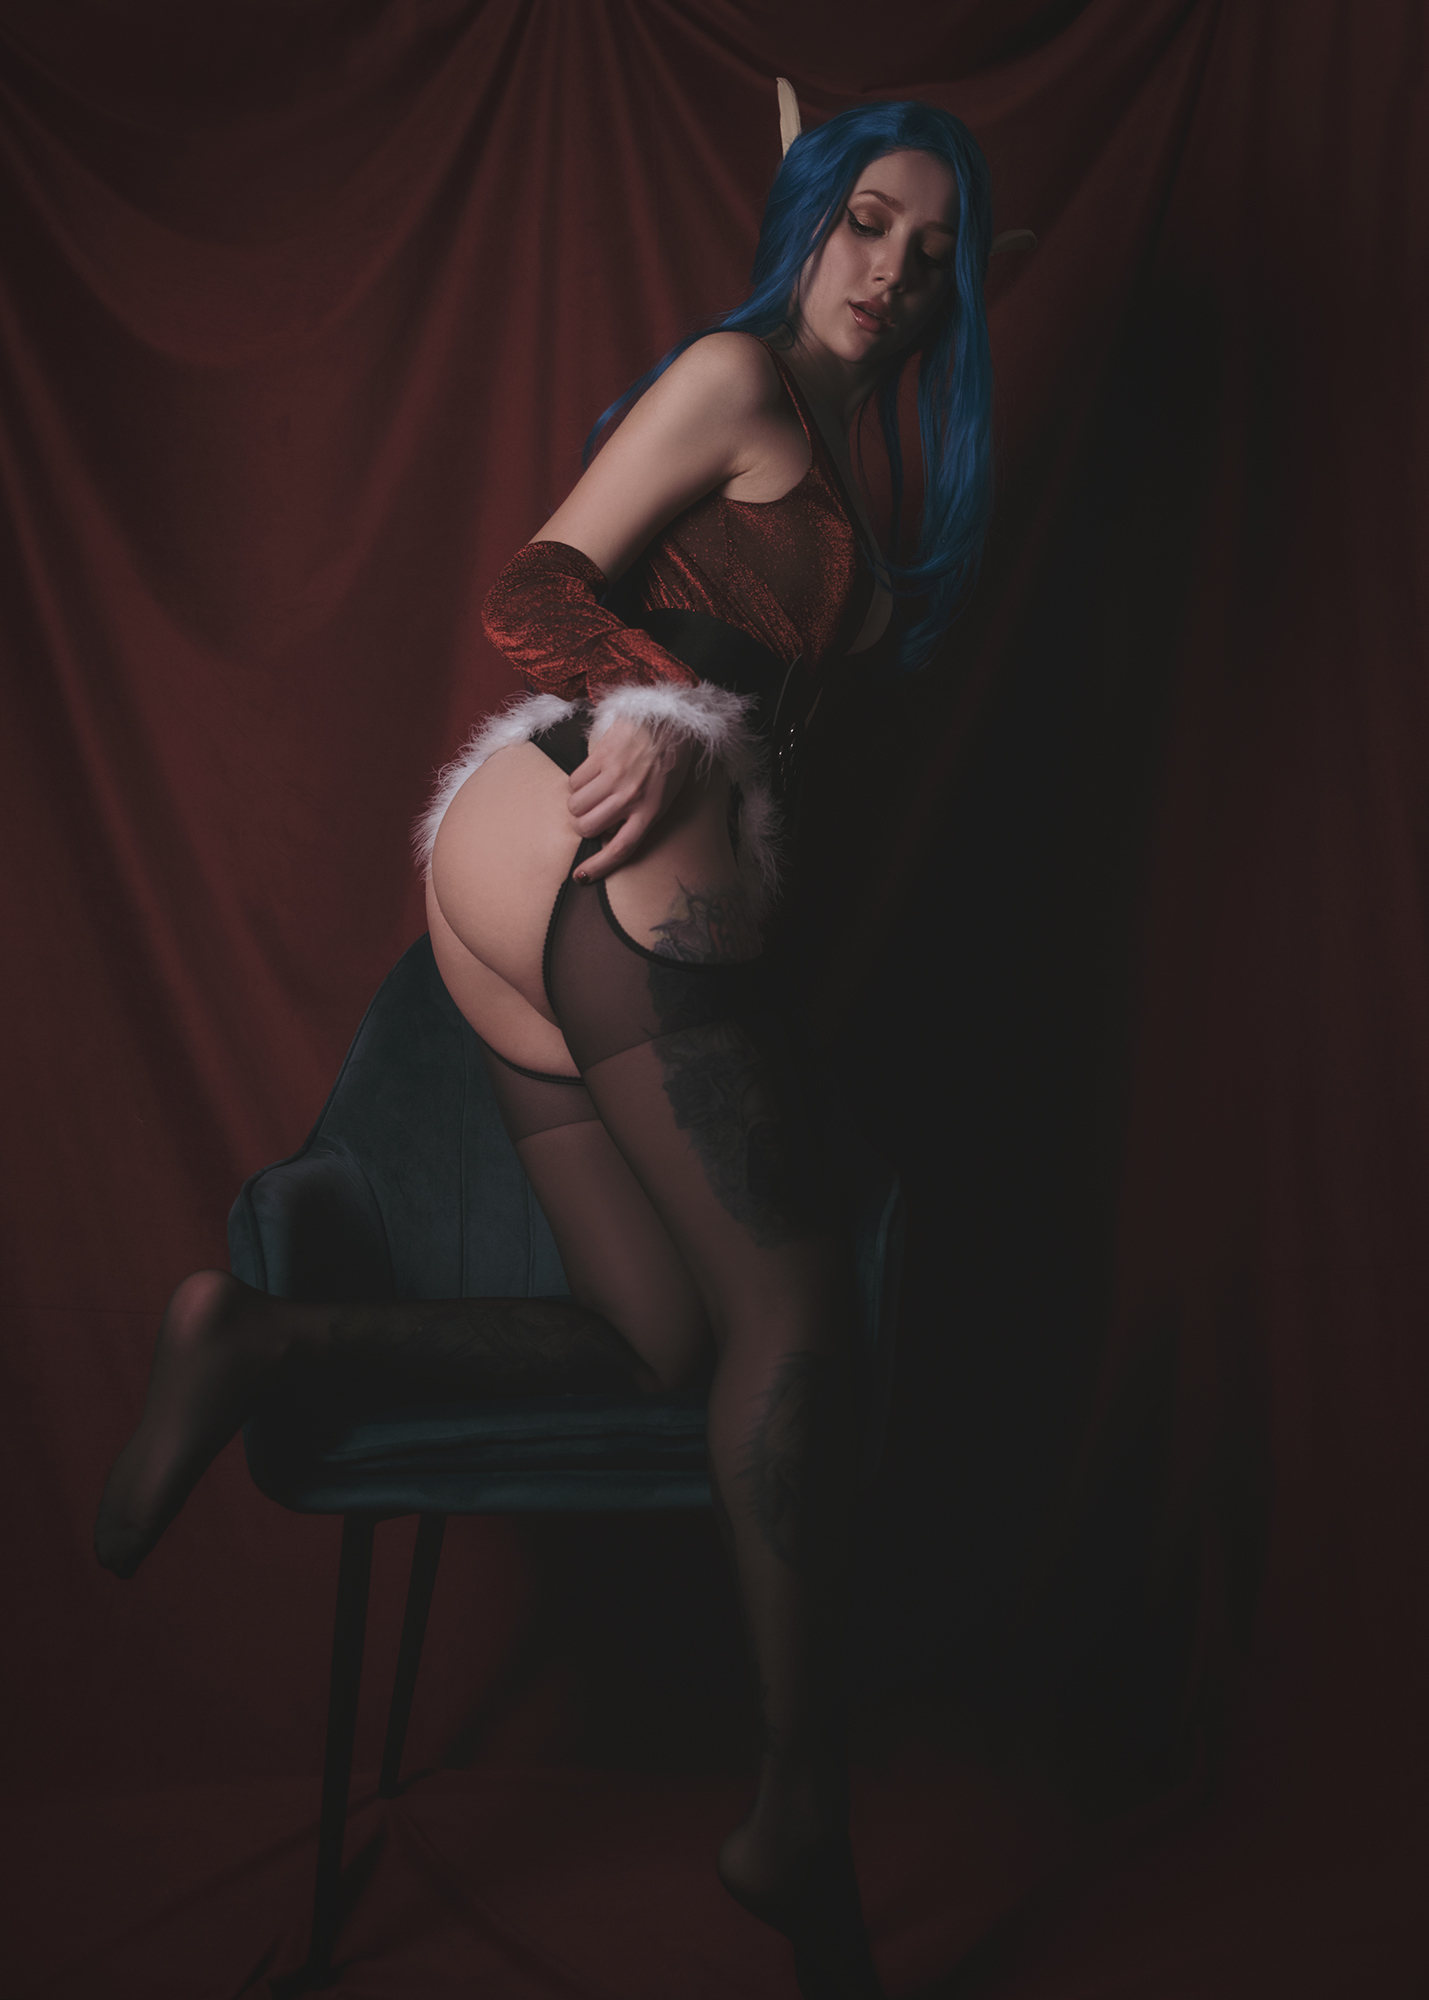 New year elf - NSFW, My, Erotic, New Year, Professional shooting